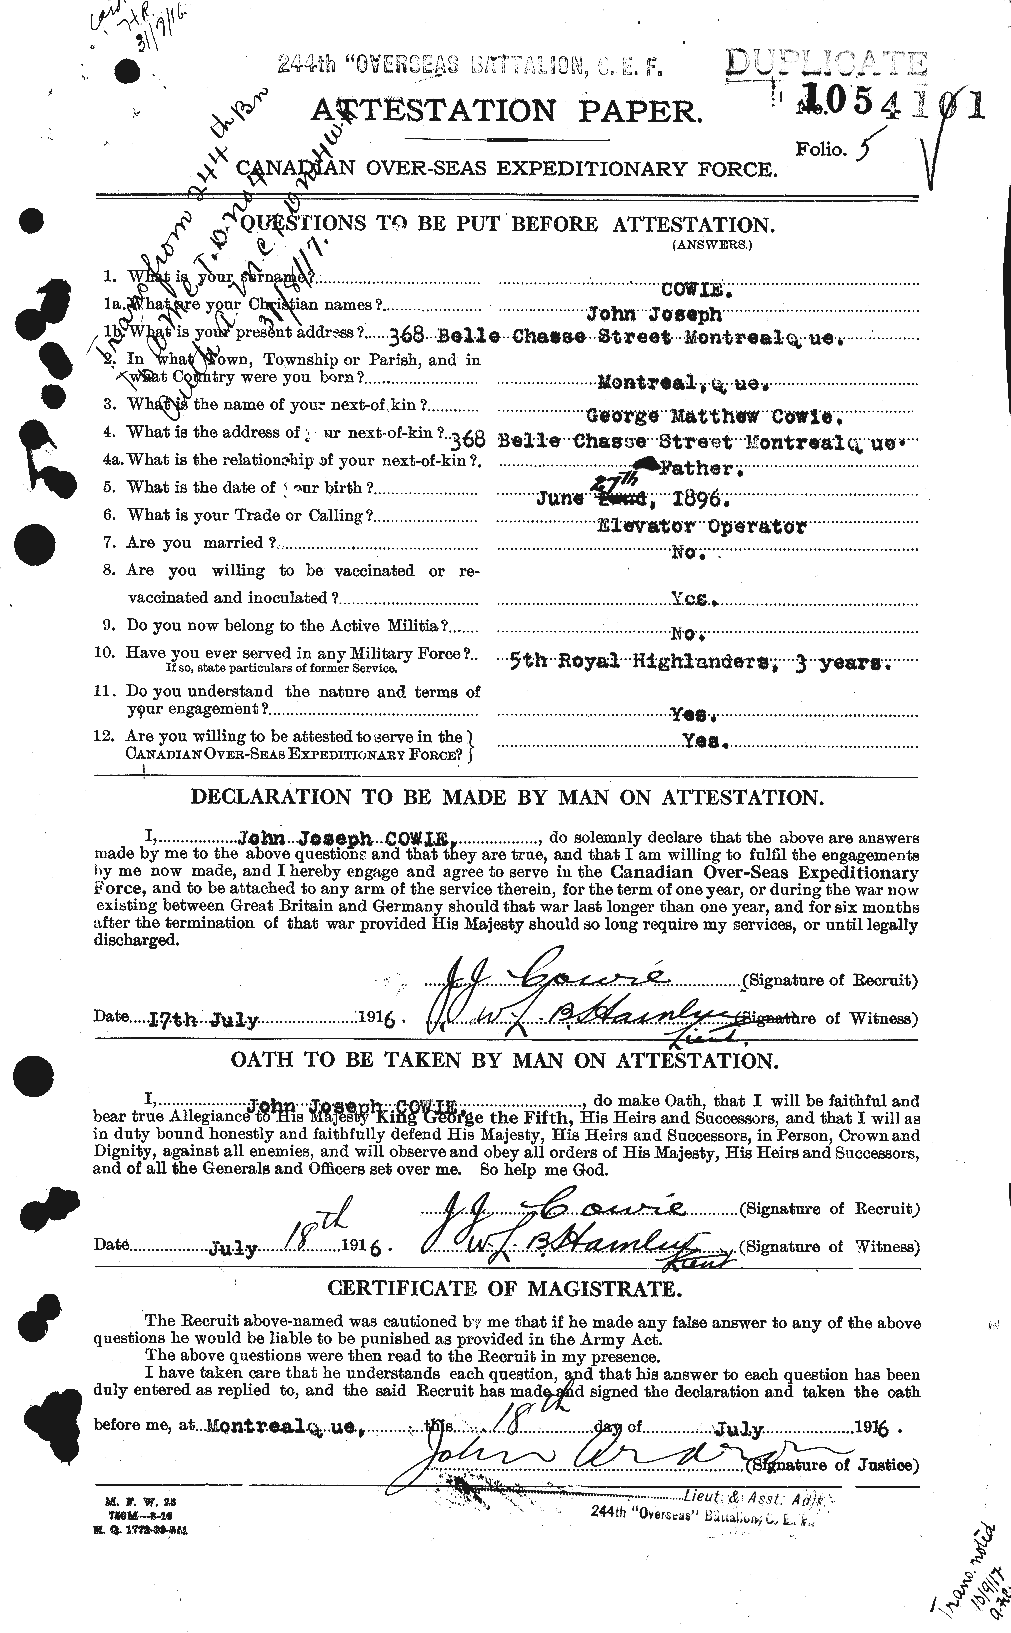 Personnel Records of the First World War - CEF 060000a